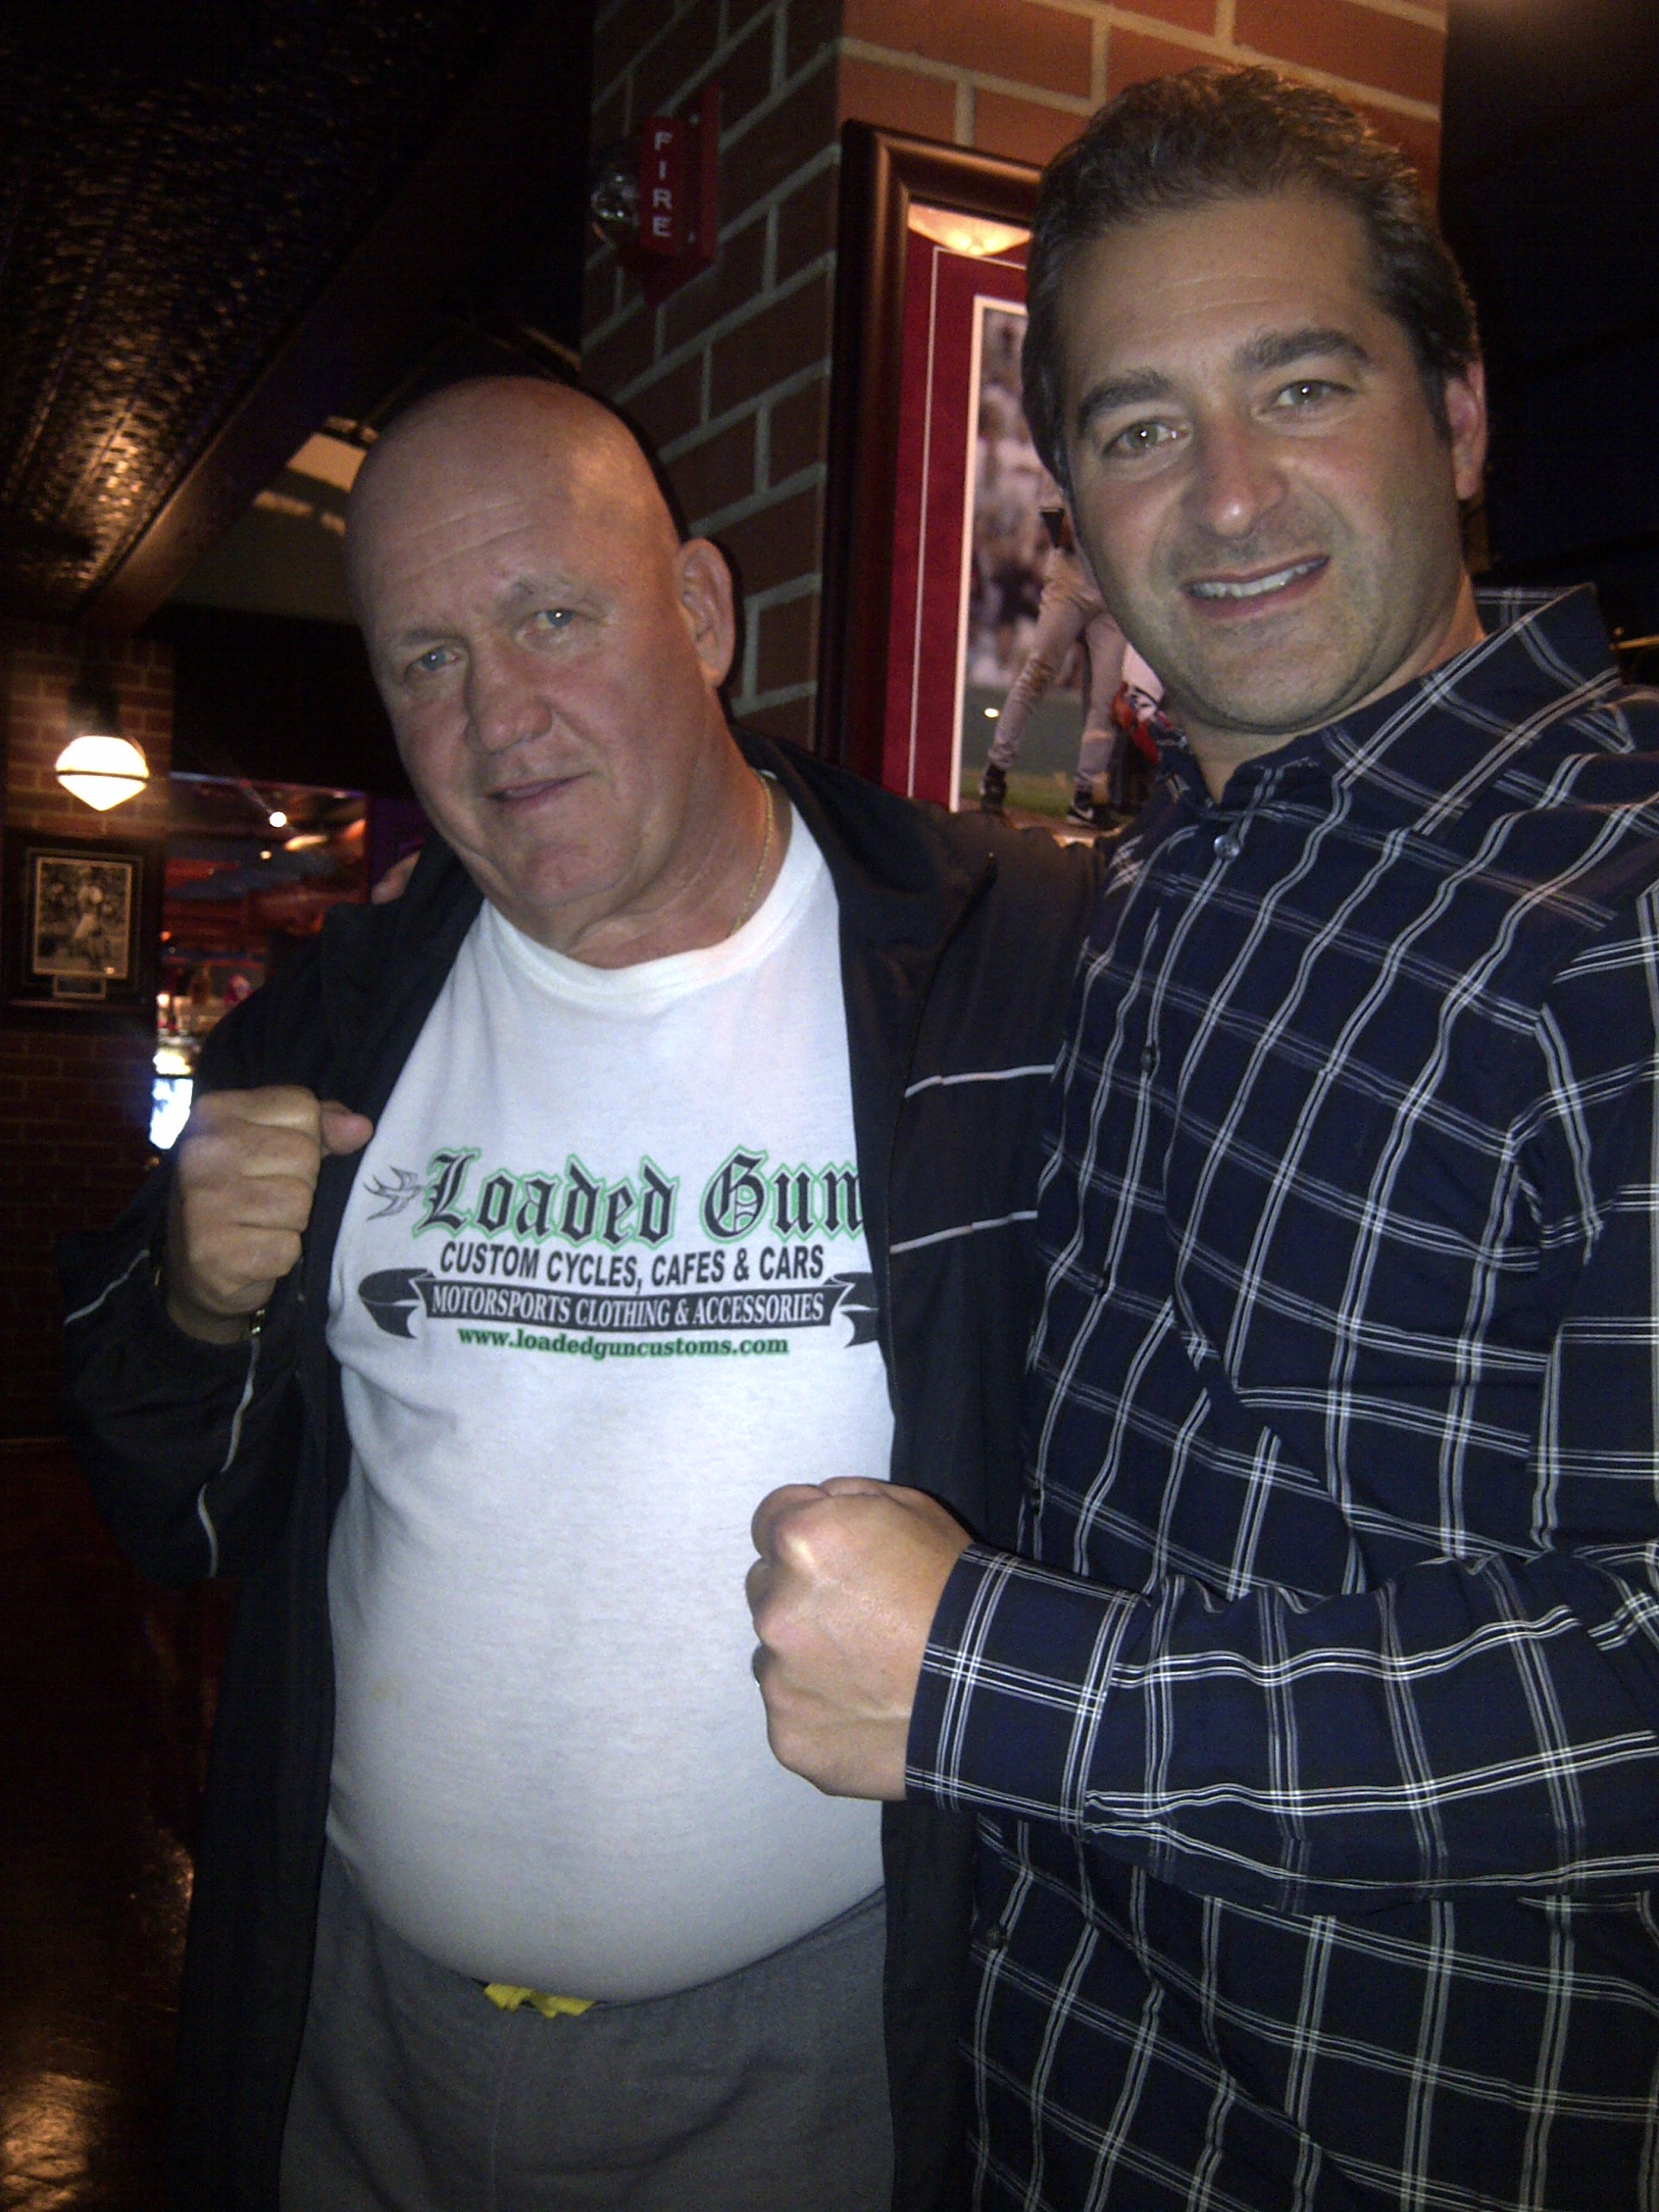 with boxing trainer Kevin Rooney - October 2011